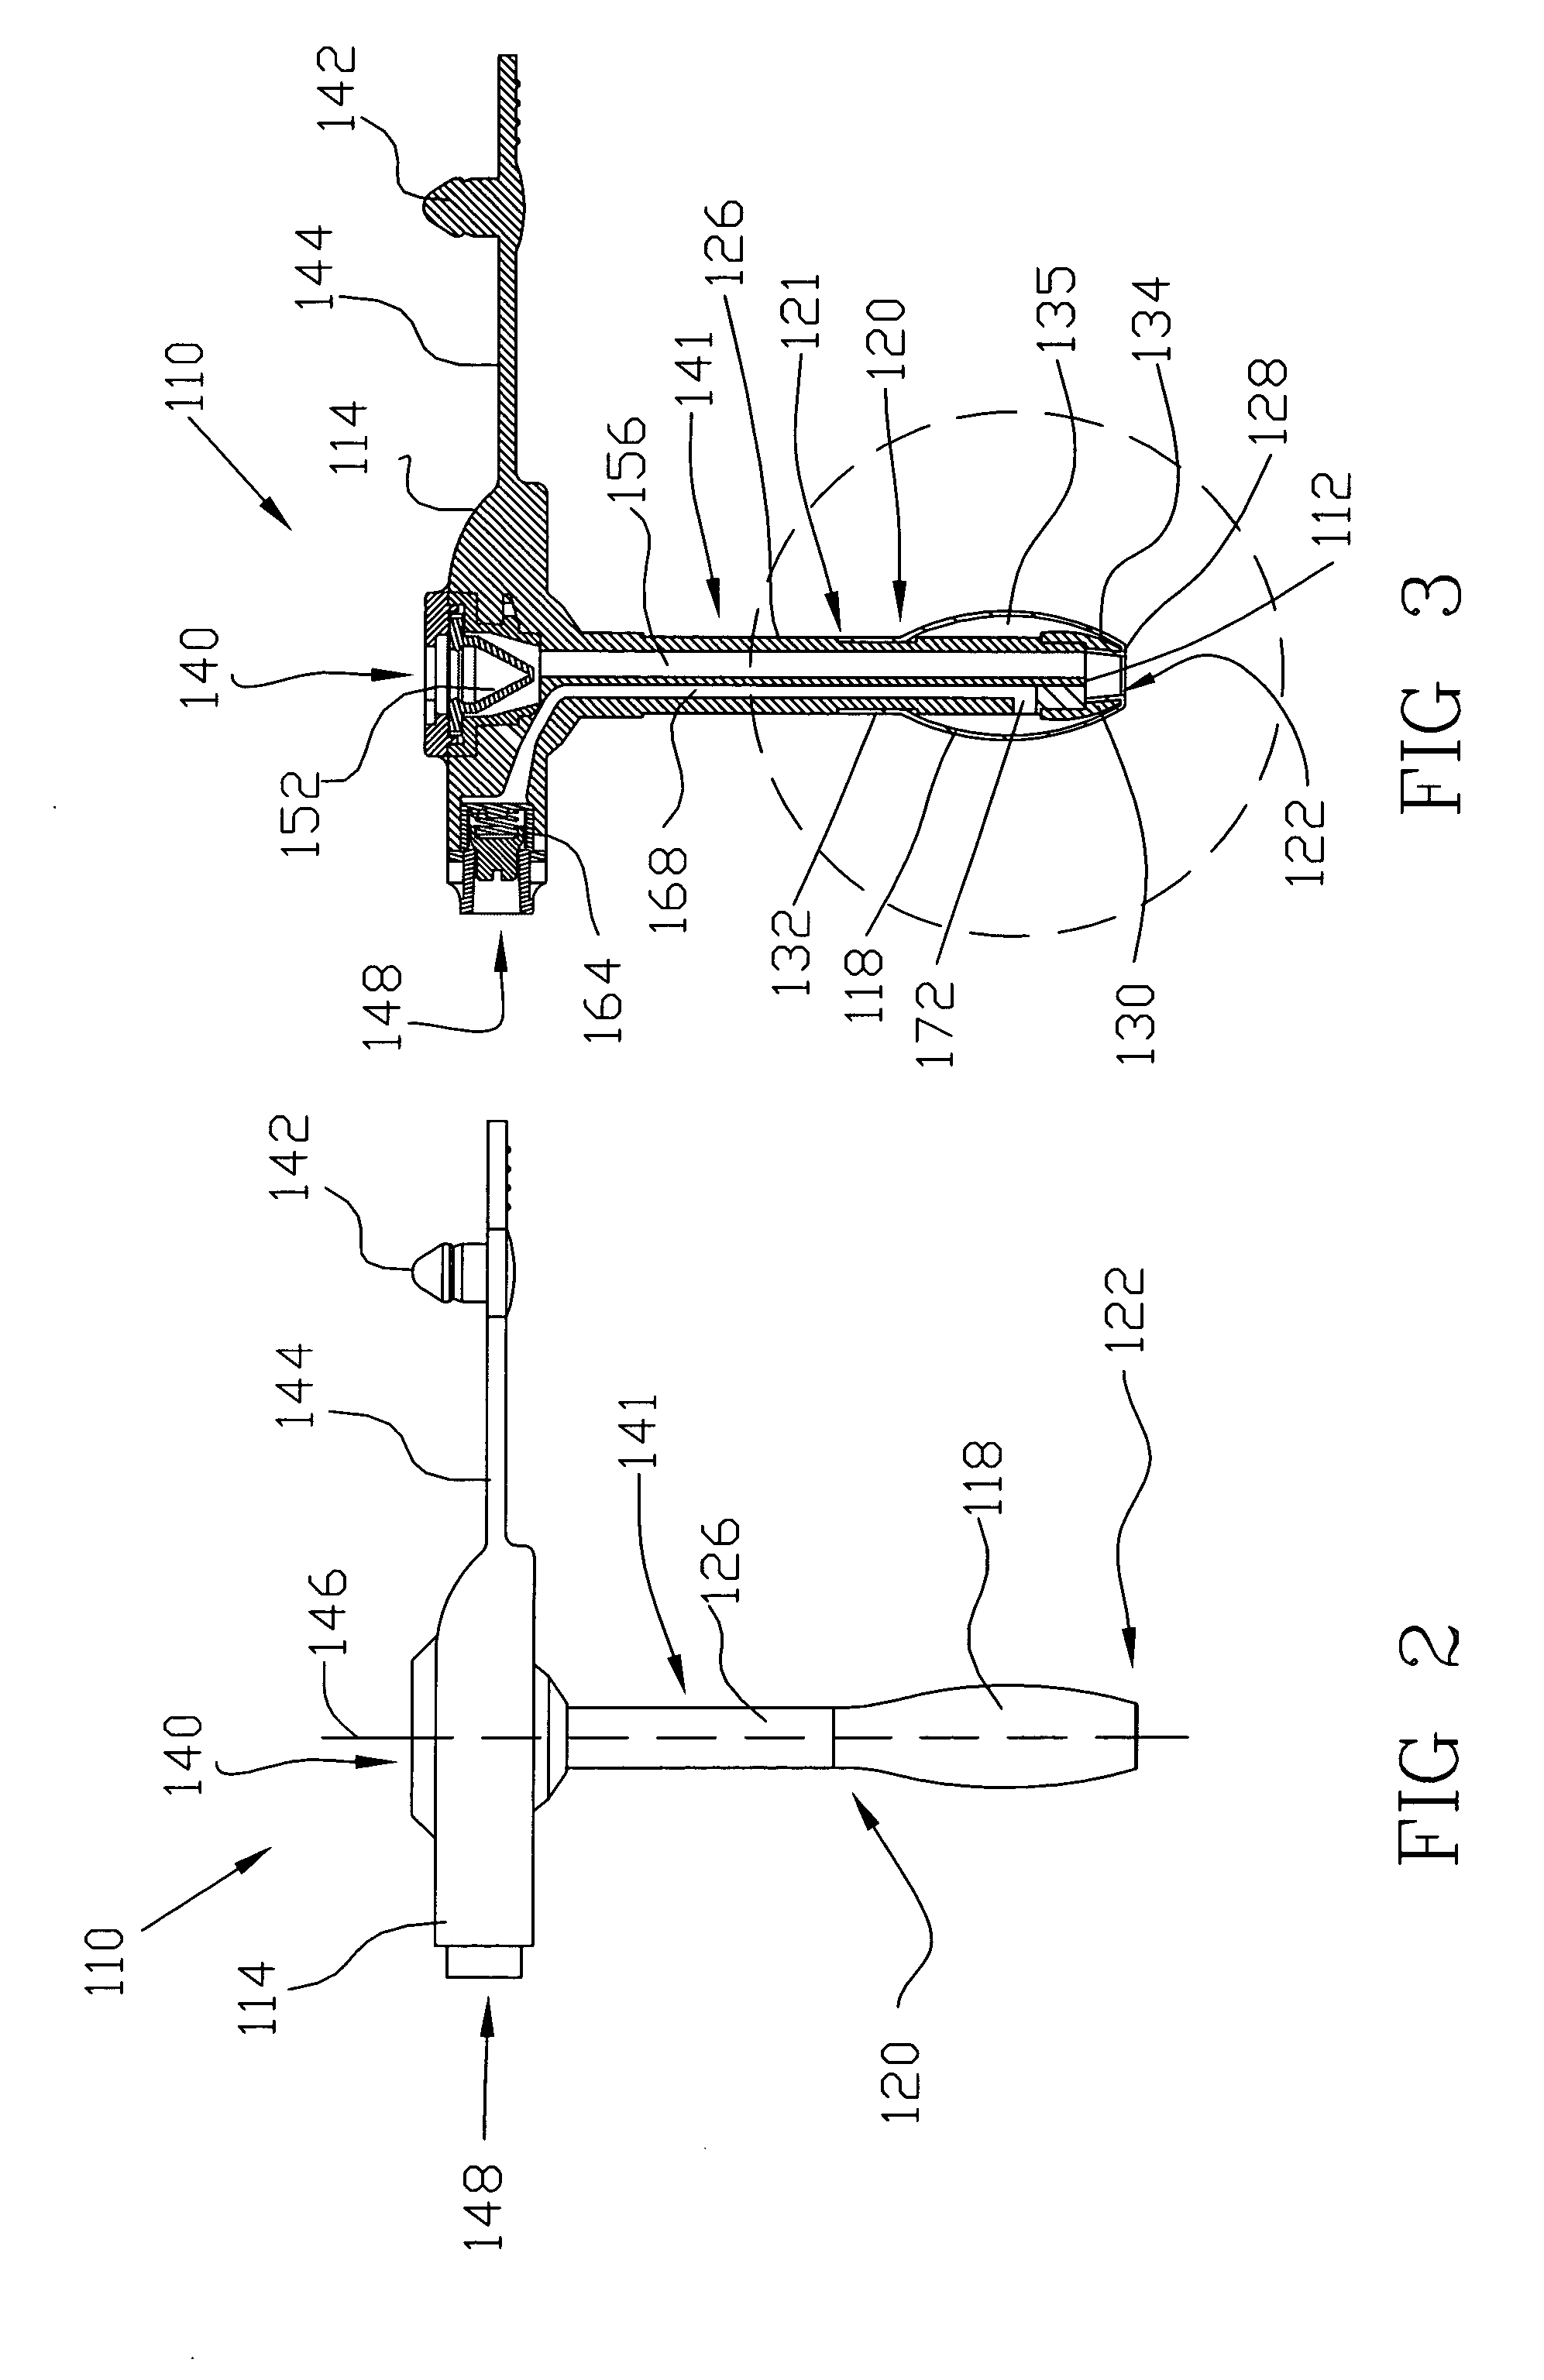 Catheter having a balloon member recessedly attached thereto